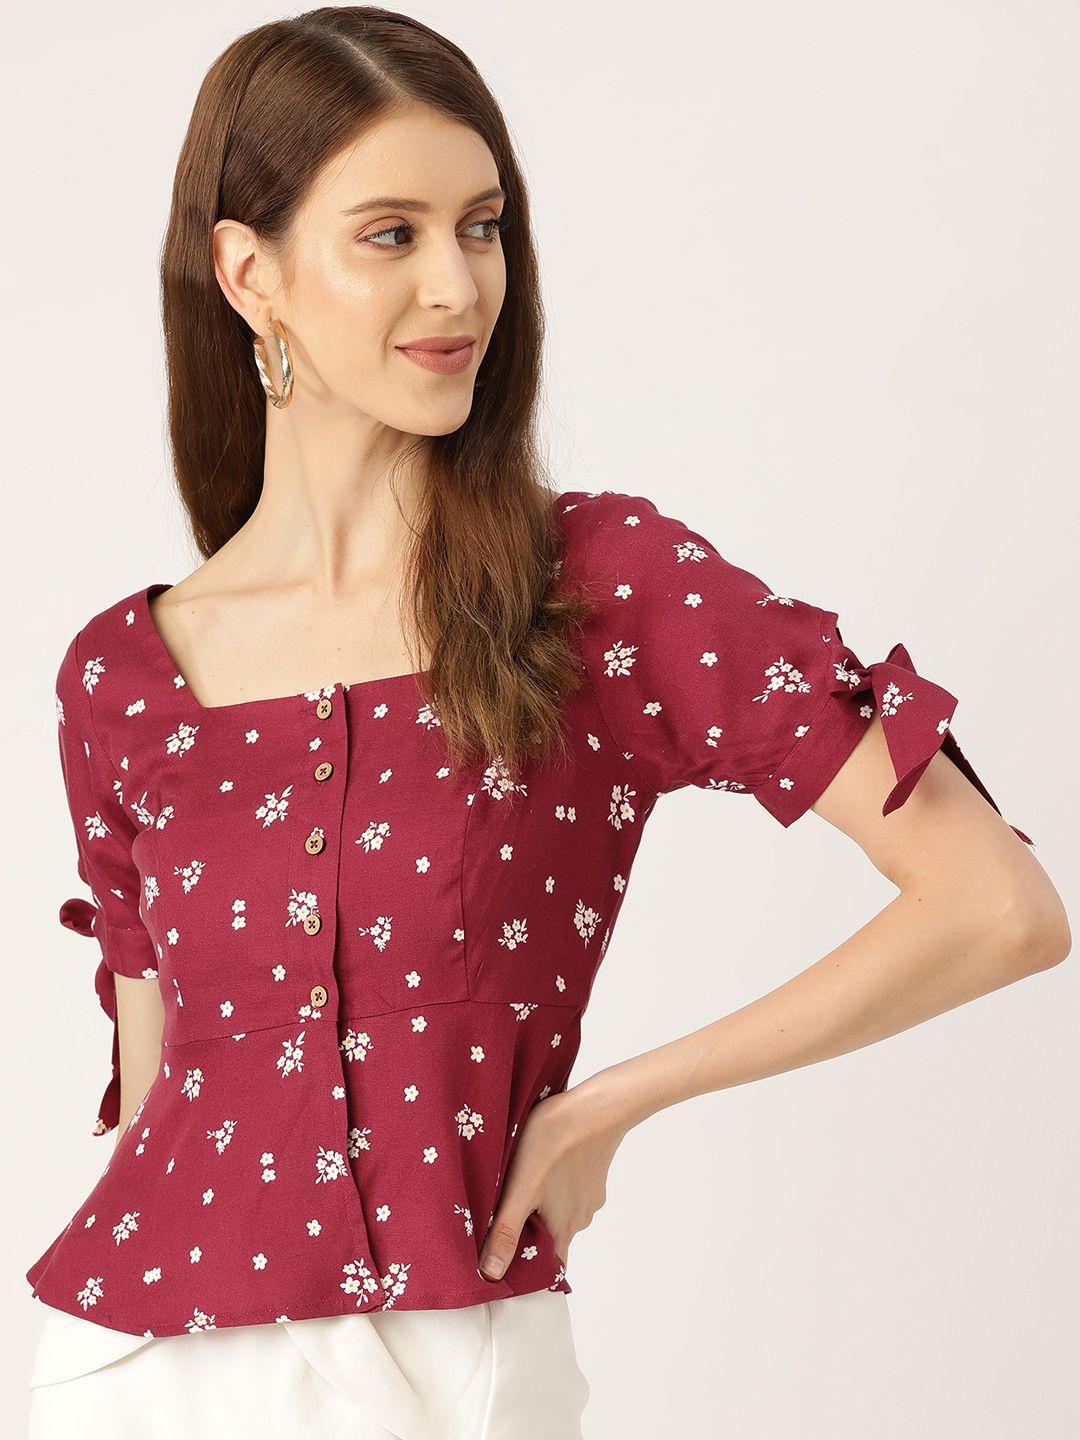 20dresses women maroon & white floral printed a-line top